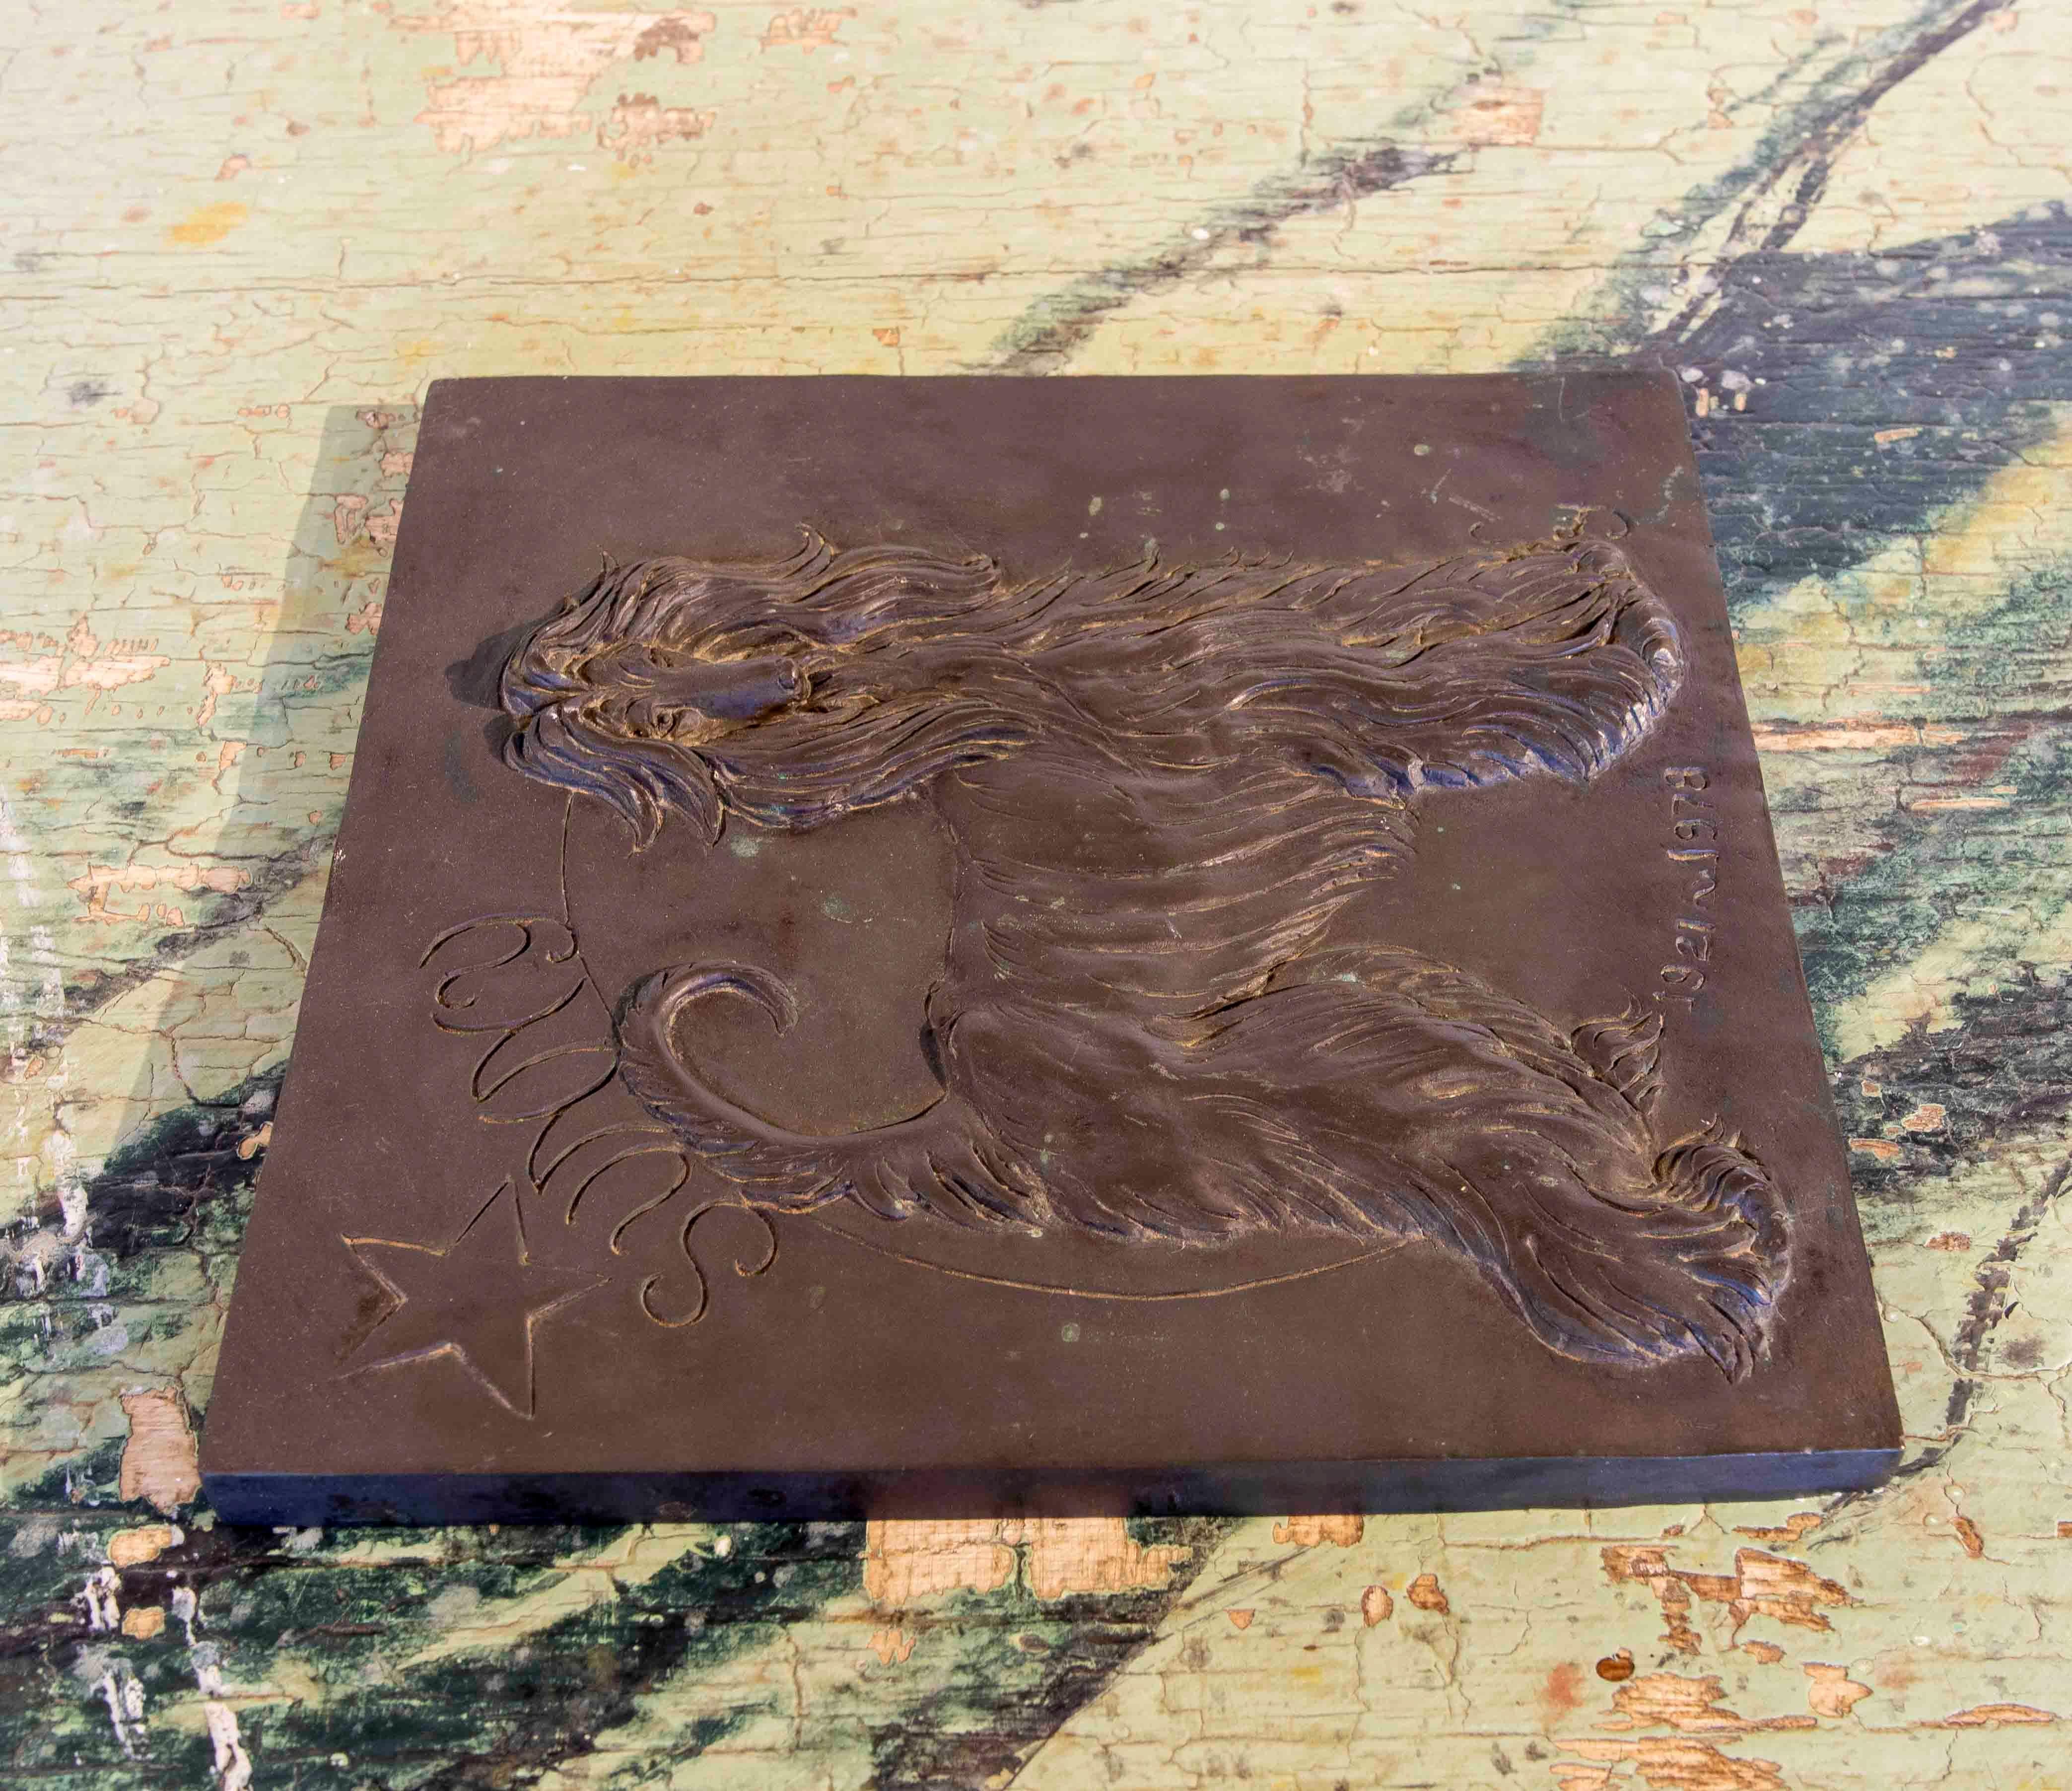 20th Century Signed Bronze Commemorative Plaque with Image of Dog and 